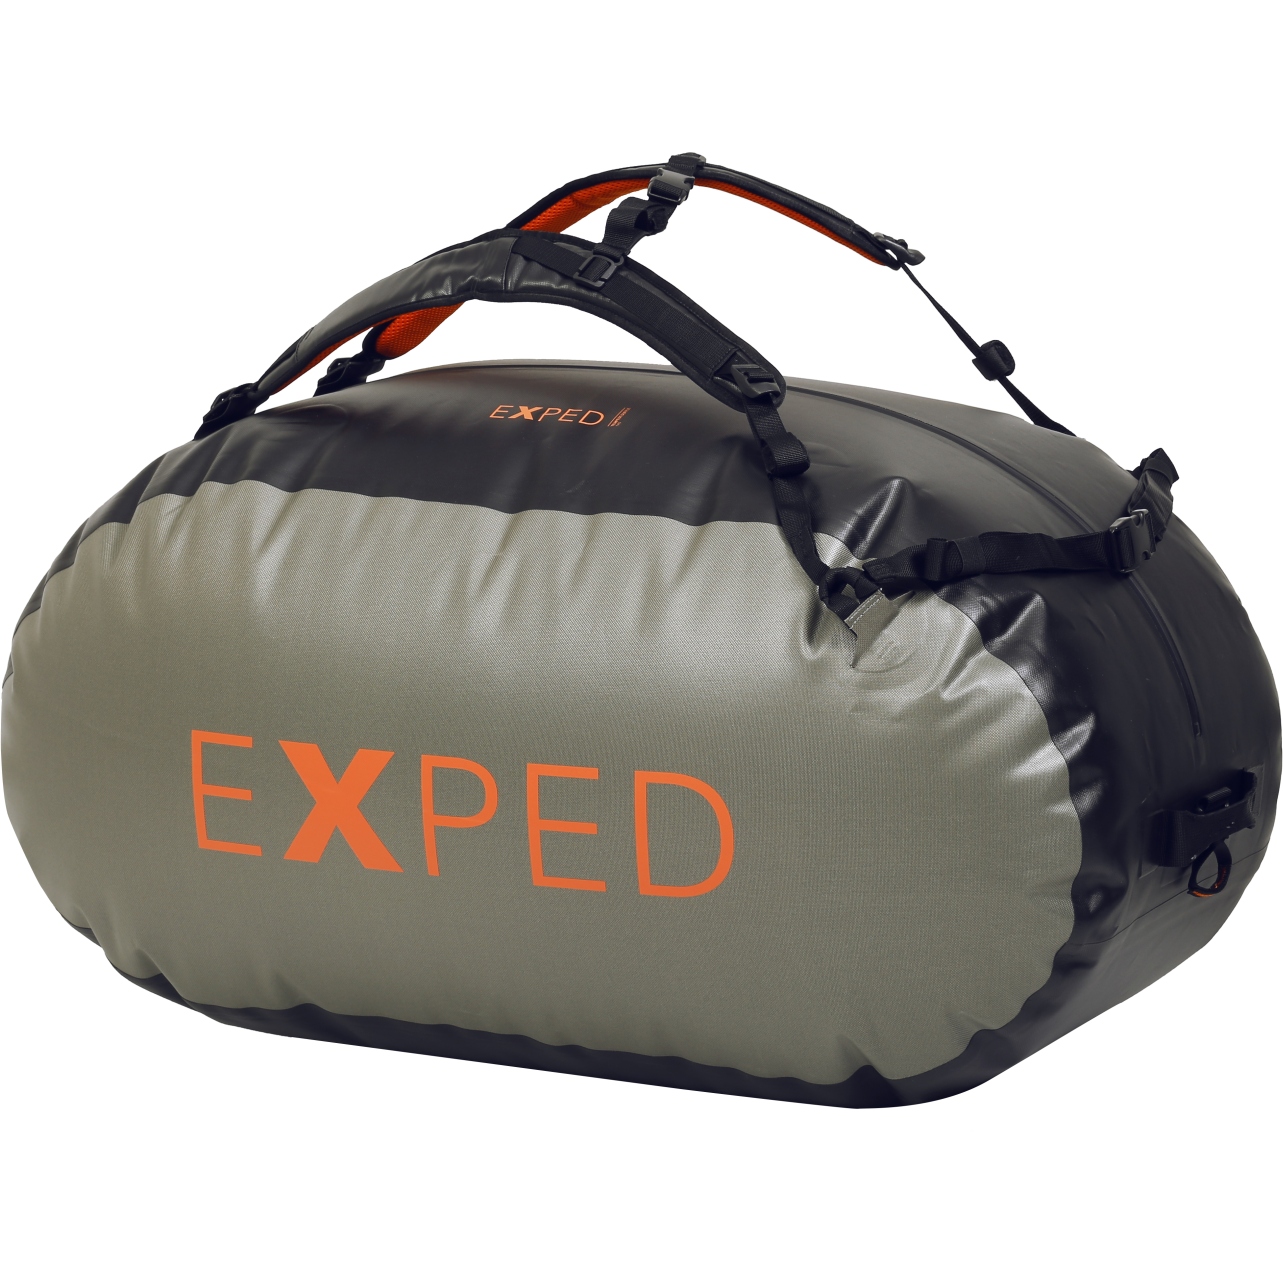 Picture of Exped Tempest 140 Duffle Bag - black-olive grey